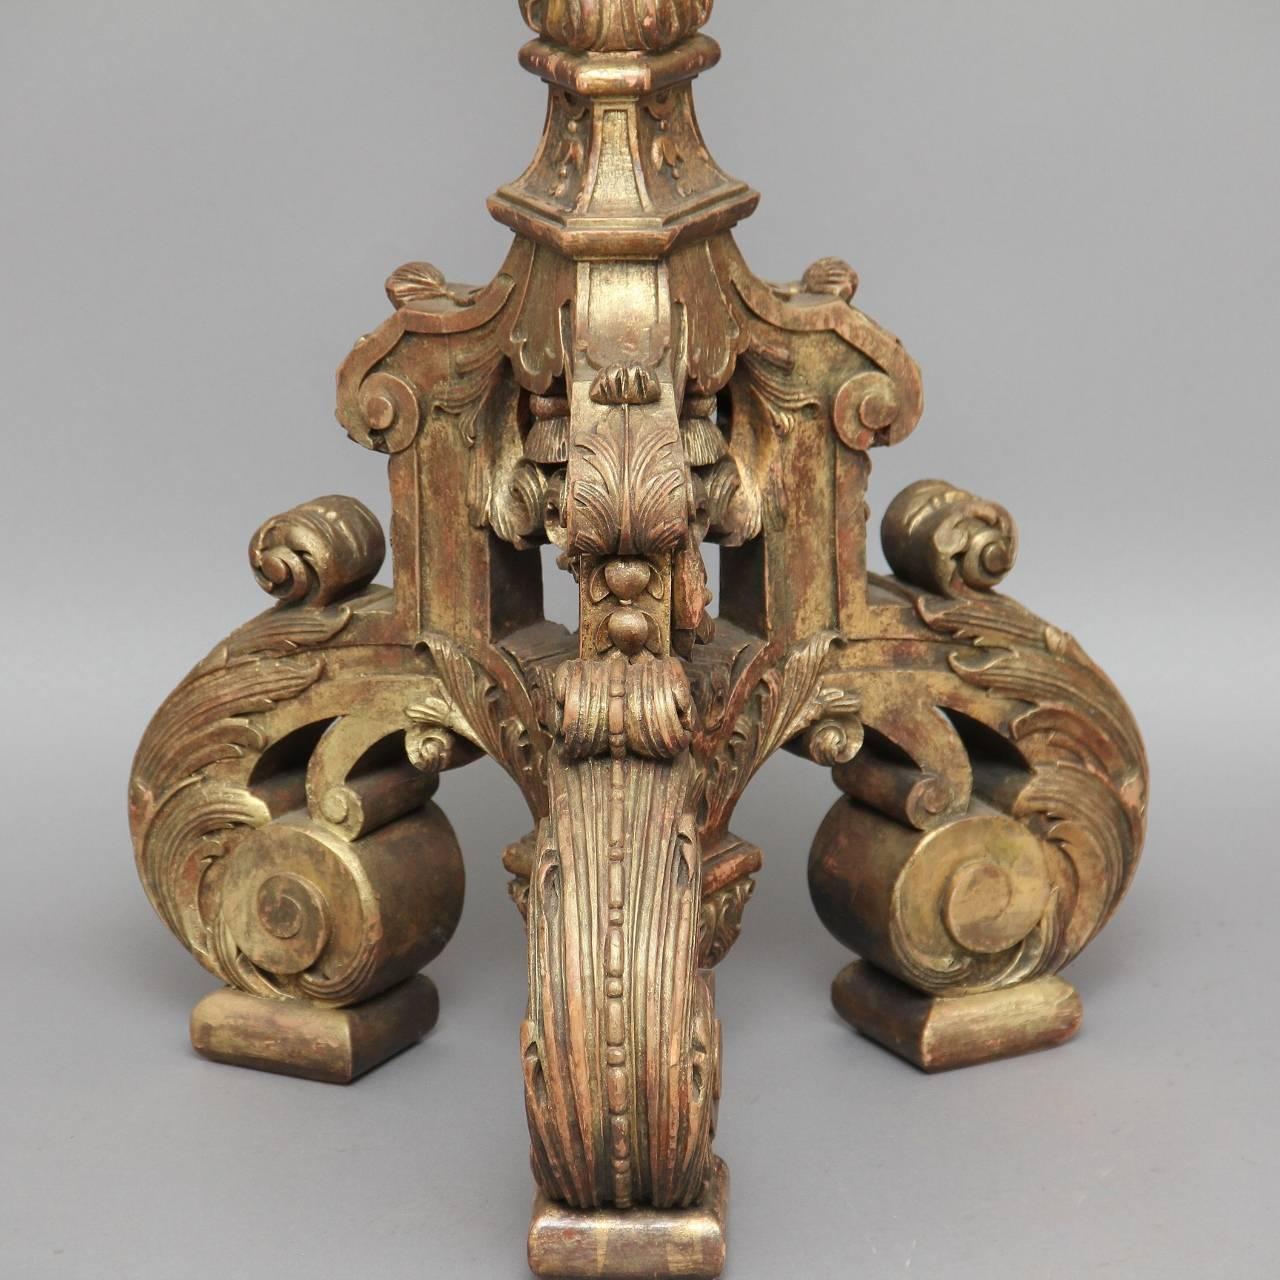 Regency Early 19th Century Carved Wood and Gilded Torcher